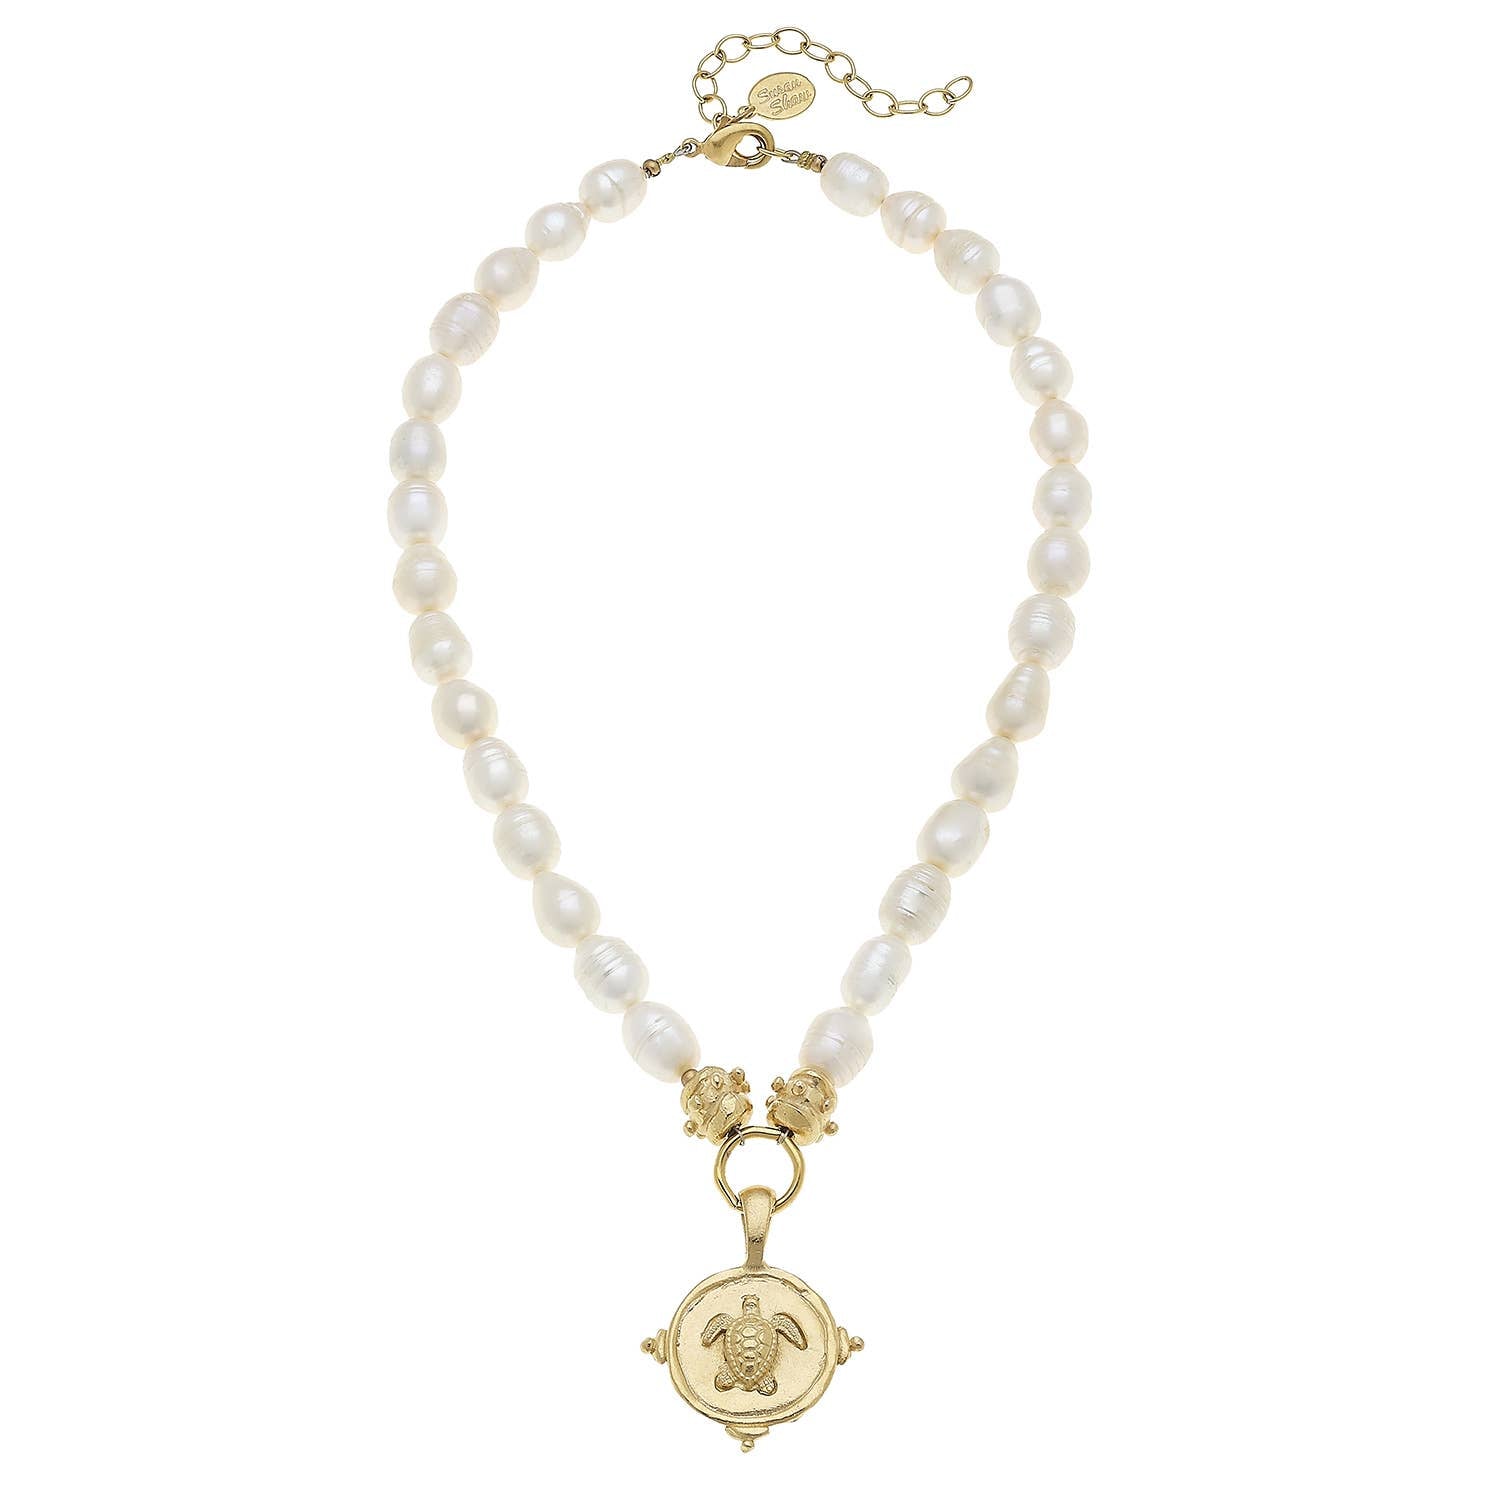 Handcast Gold Turtle on Genuine Freshwater Cultured Pearls